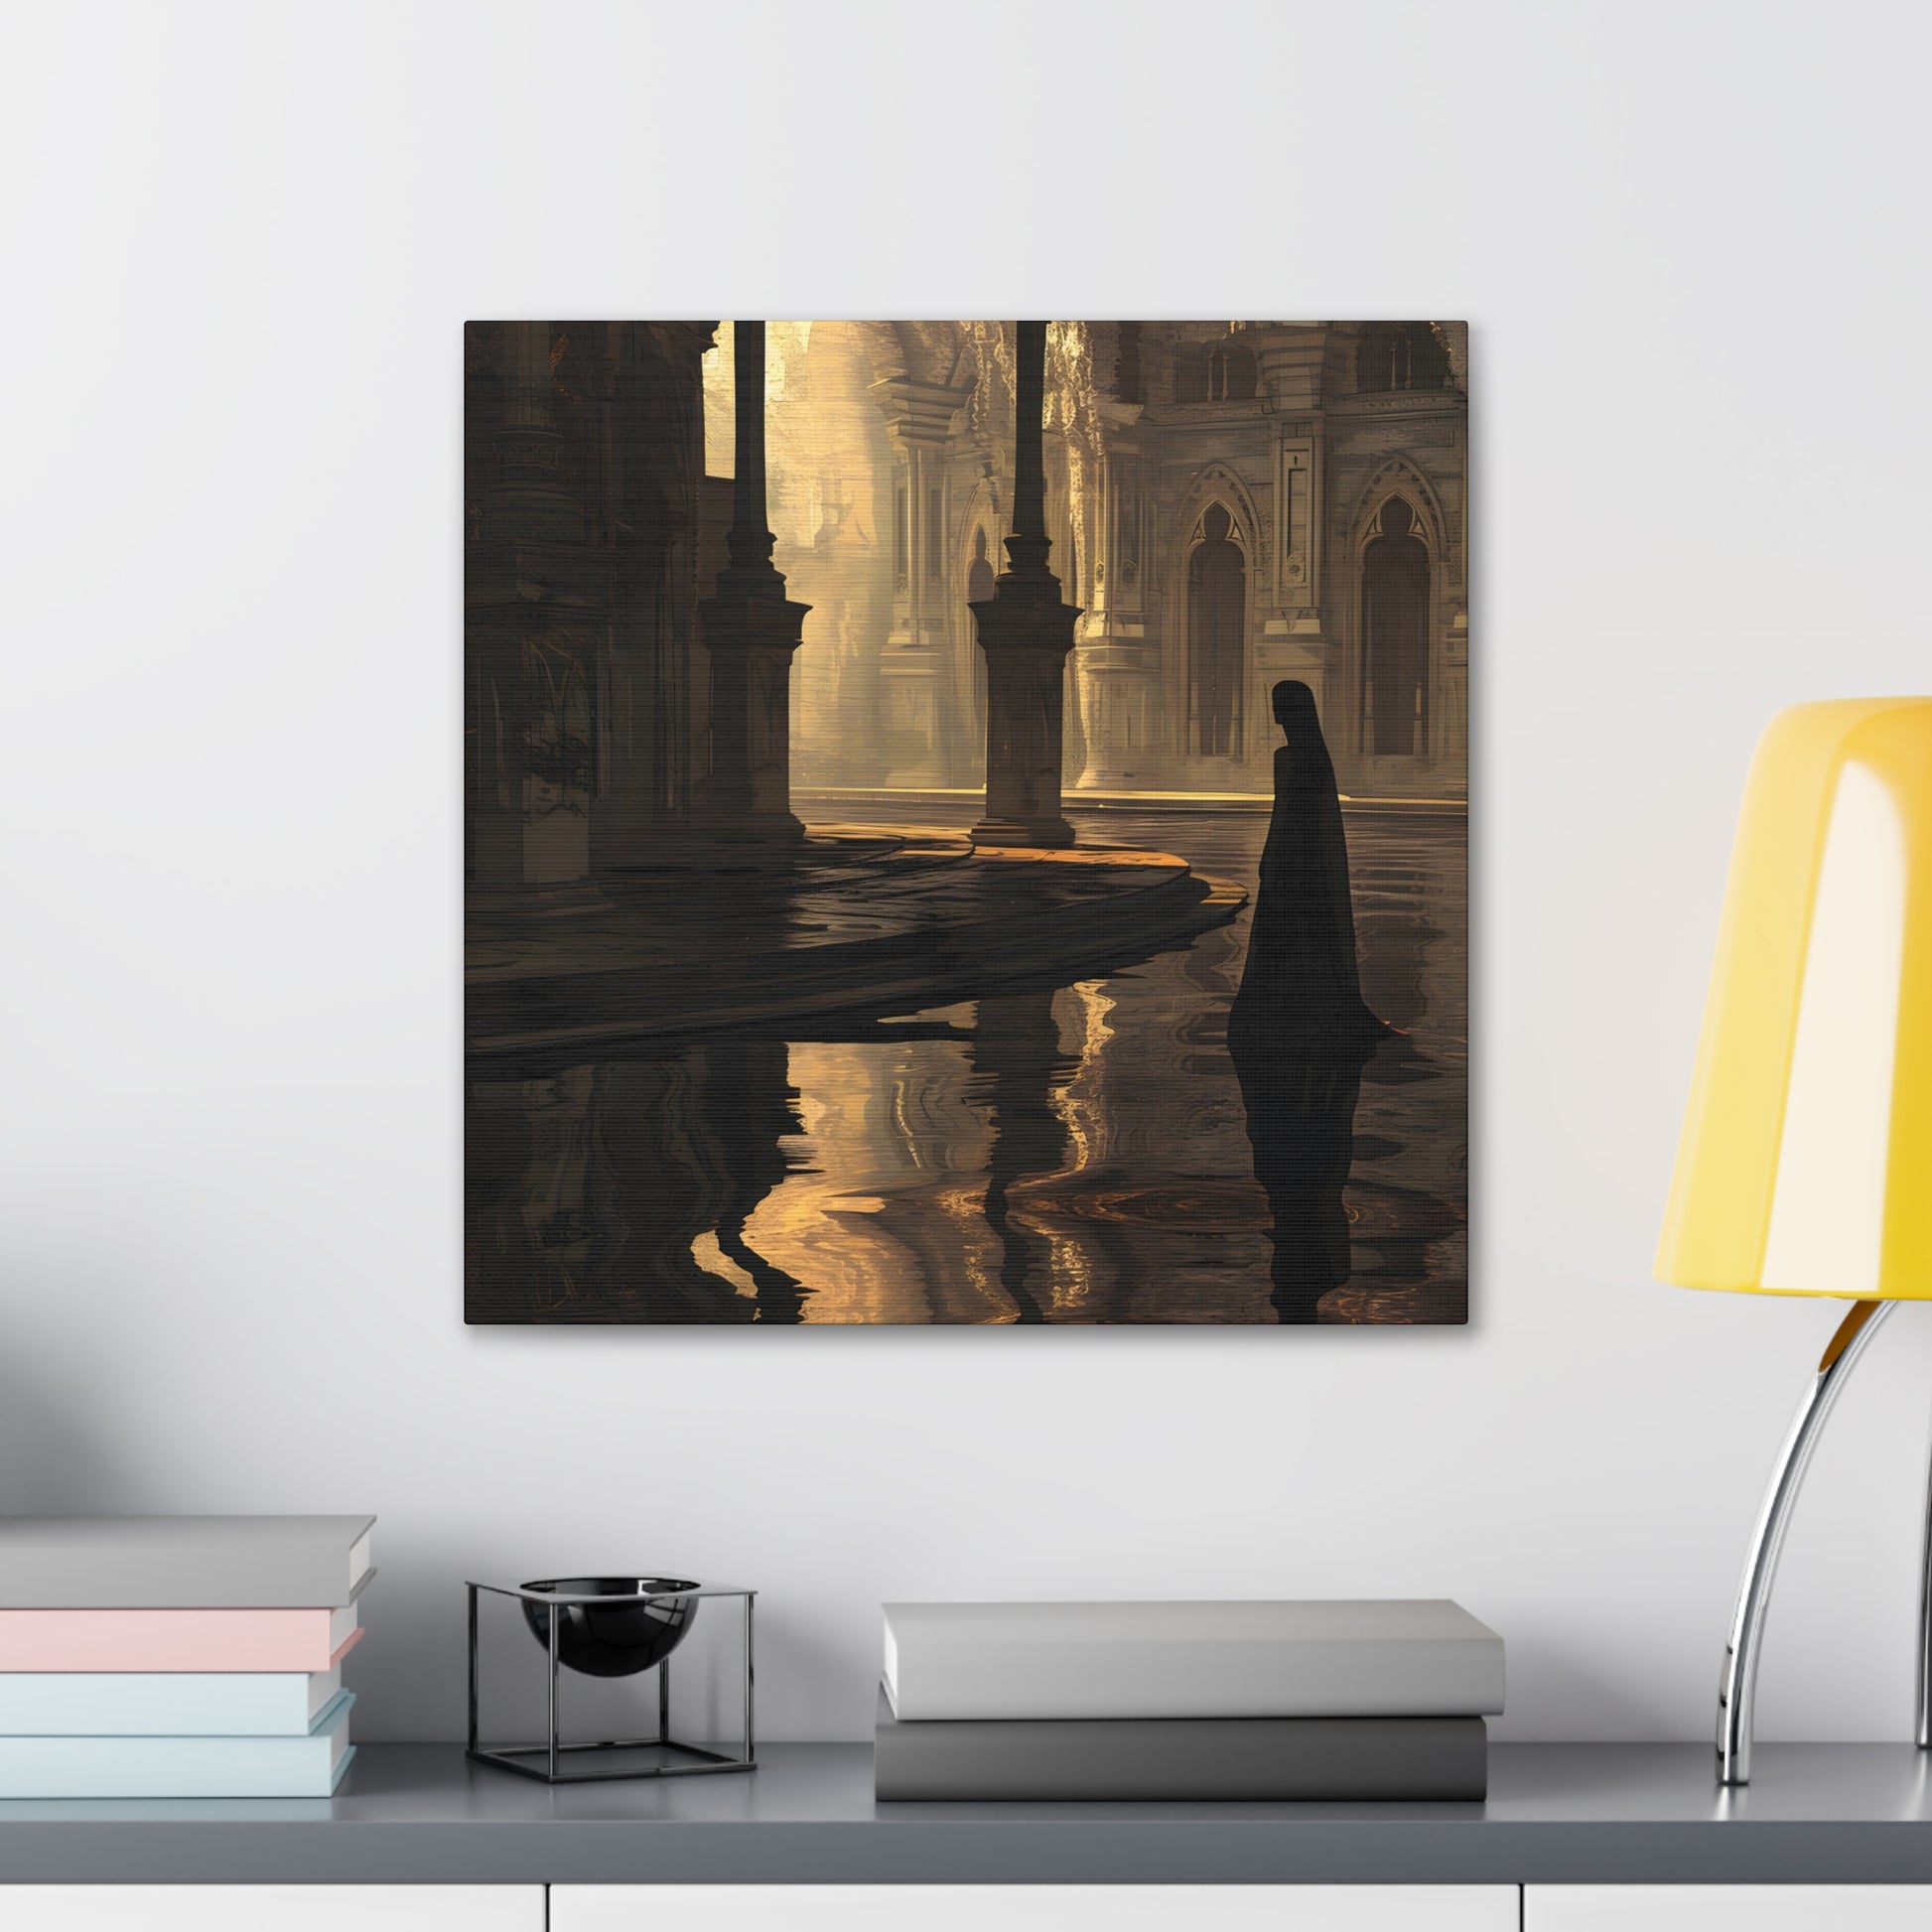 in situ 2 Avery Pennington's artwork of a golden-lit, flooded cathedral with a solitary figure in black, blending Gothic architecture with reflections in water, evoking solitude and introspection